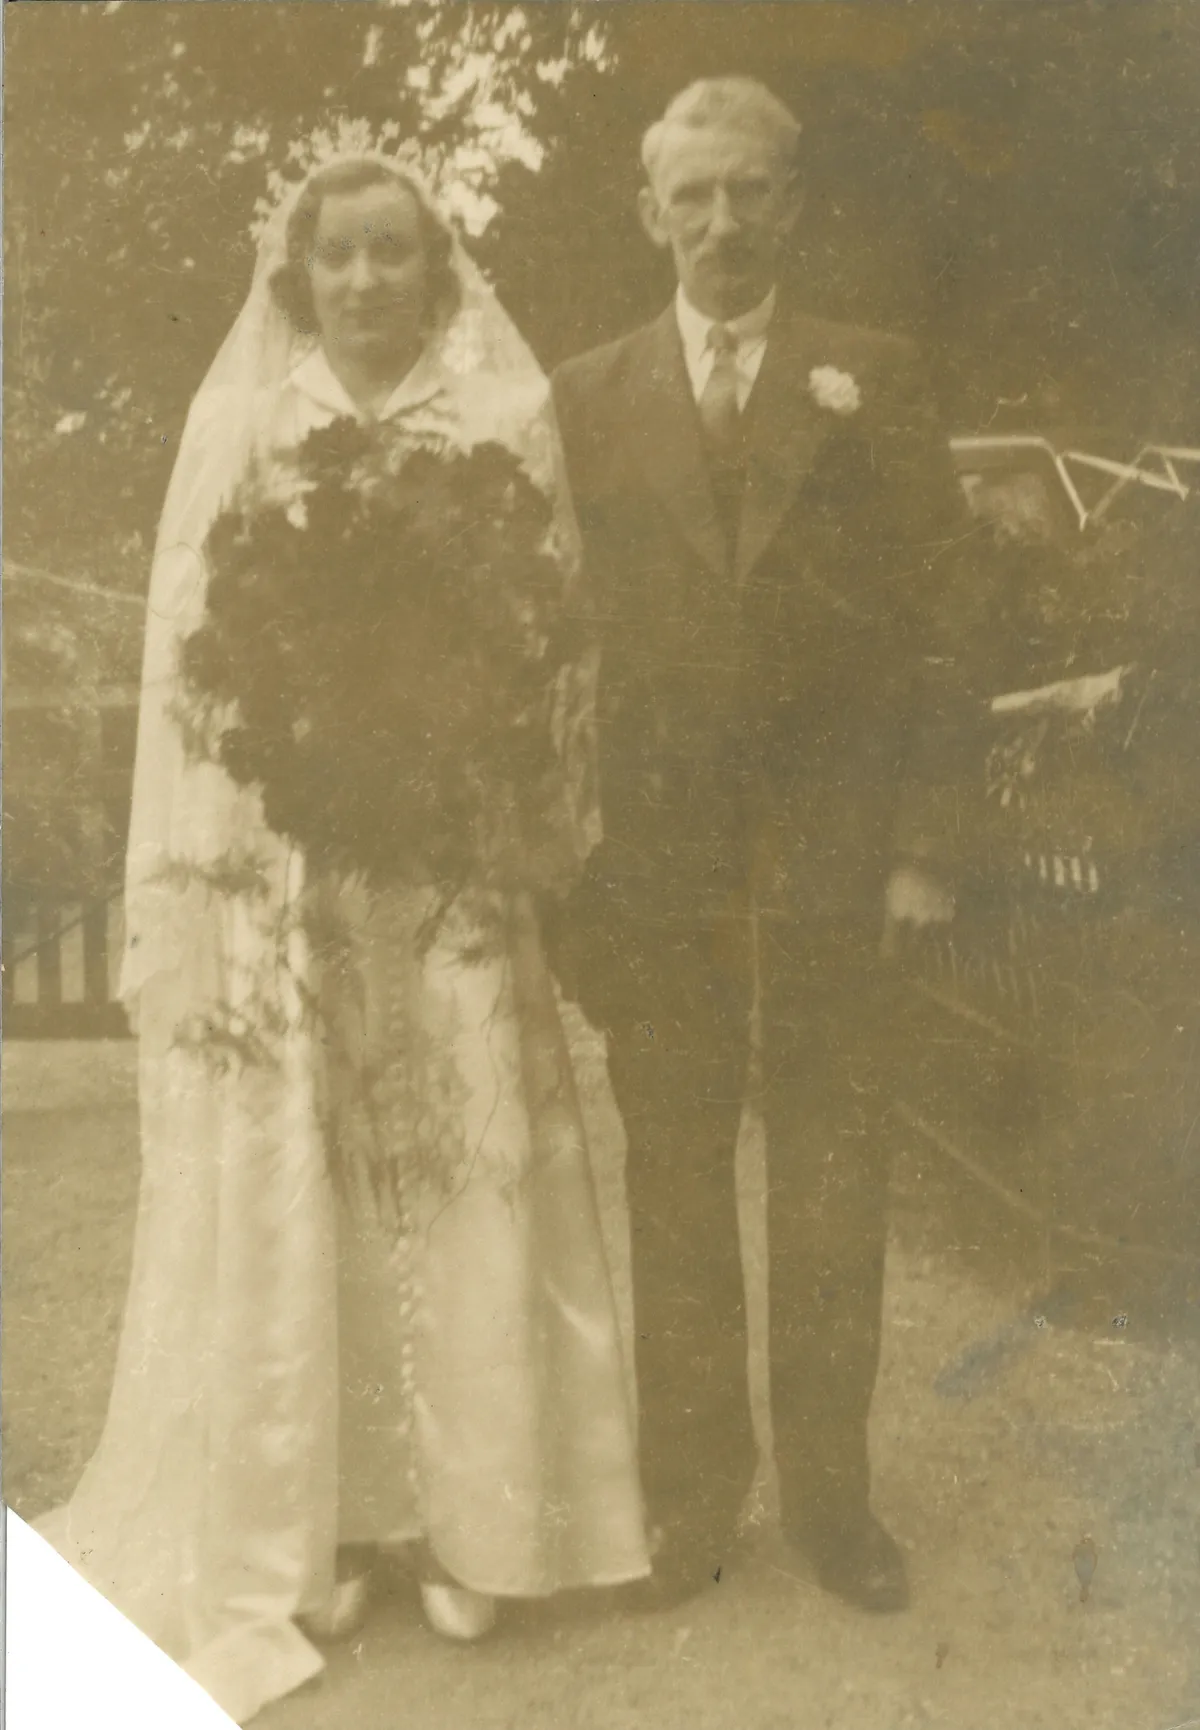 Lesley Manville's grandfather James Edwards at her mother's wedding Who Do You Think You Are?